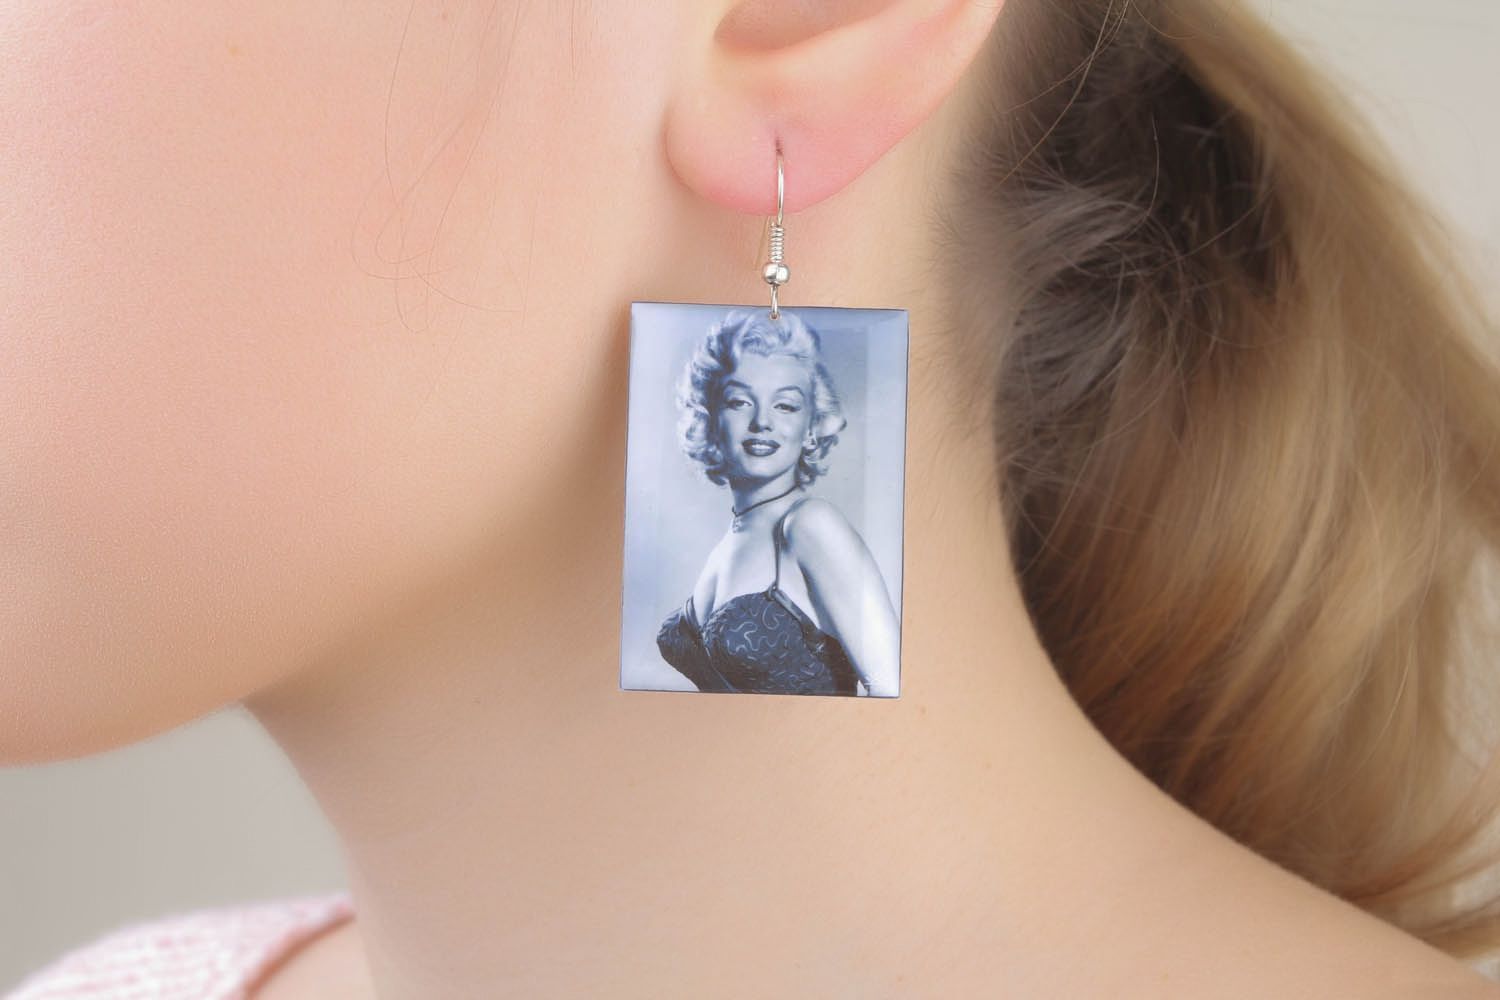 Earrings with Marilyn Monroe picture photo 1